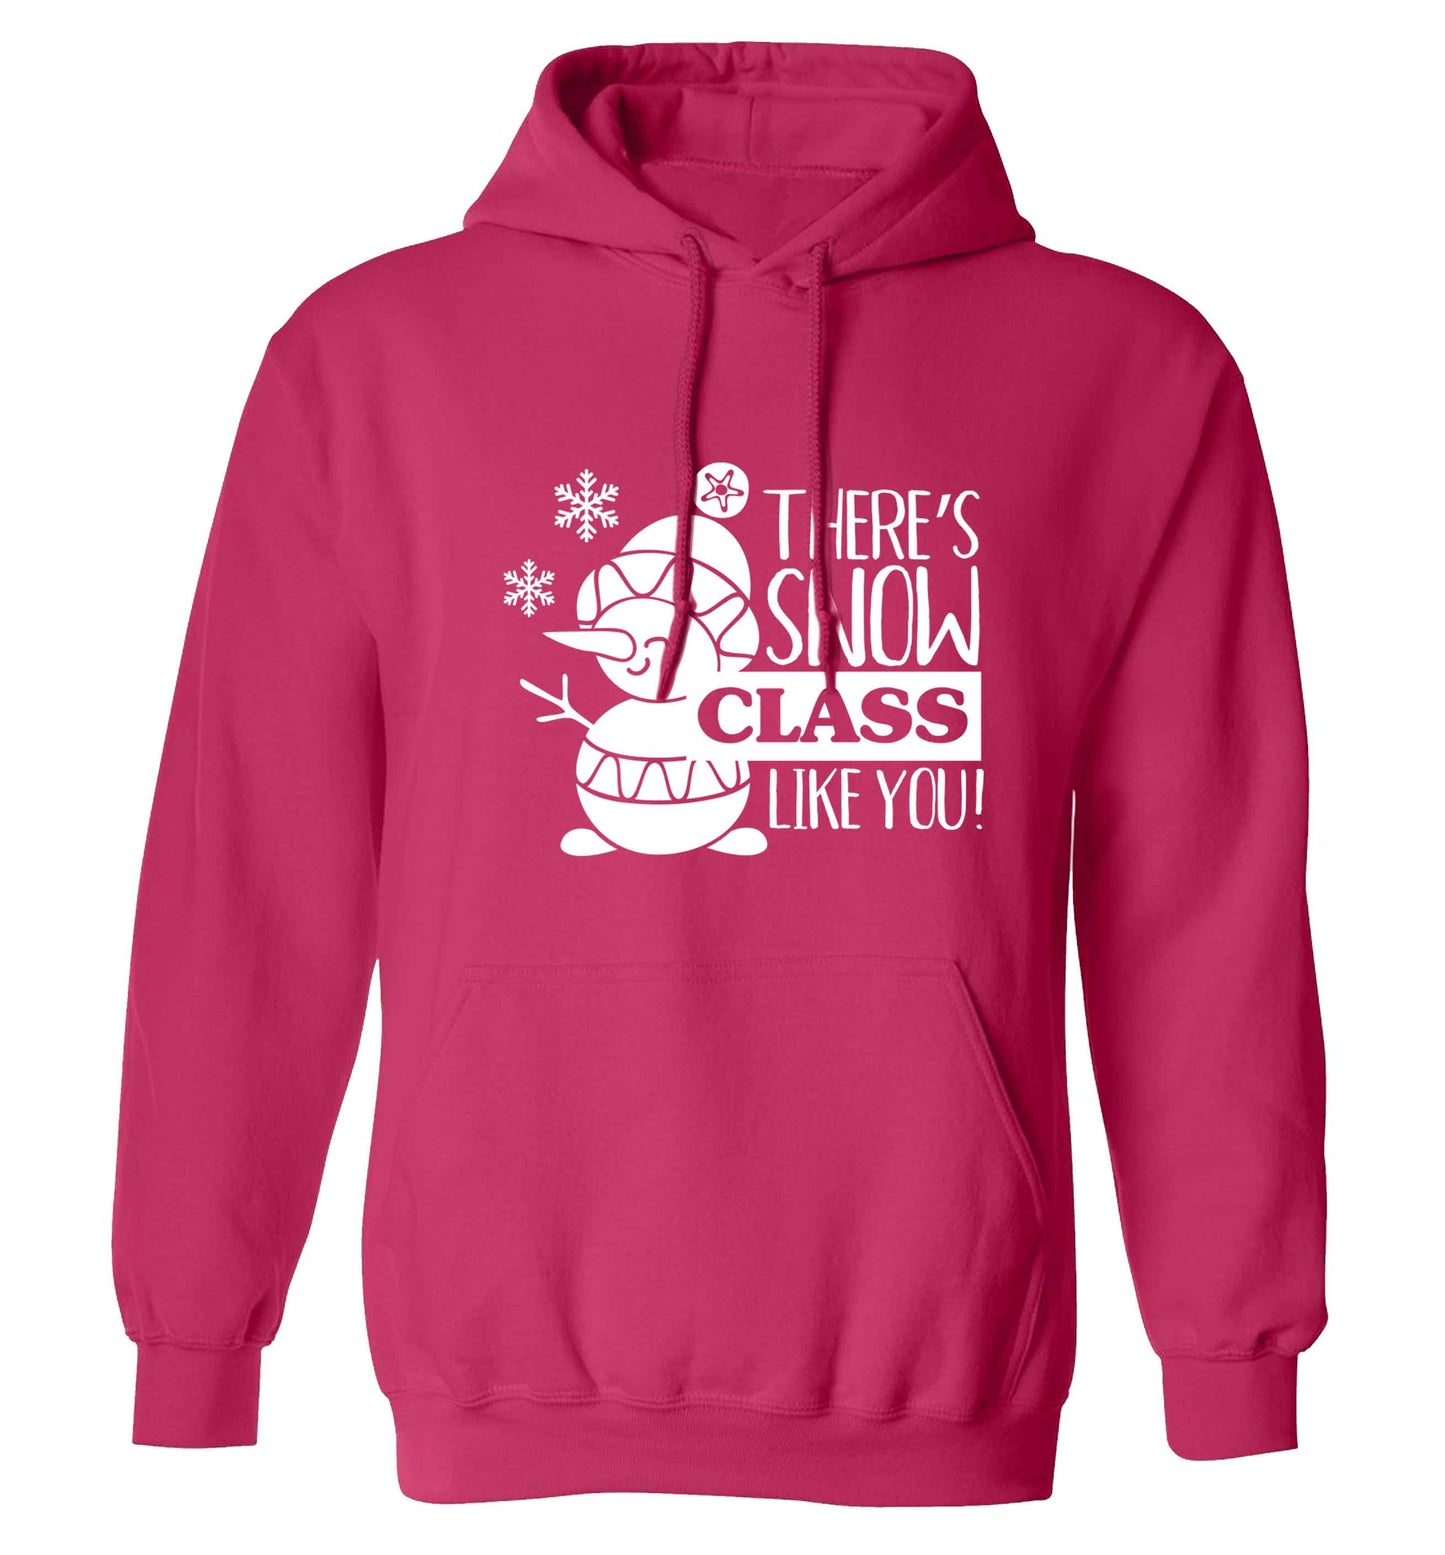 There's snow class like you adults unisex pink hoodie 2XL